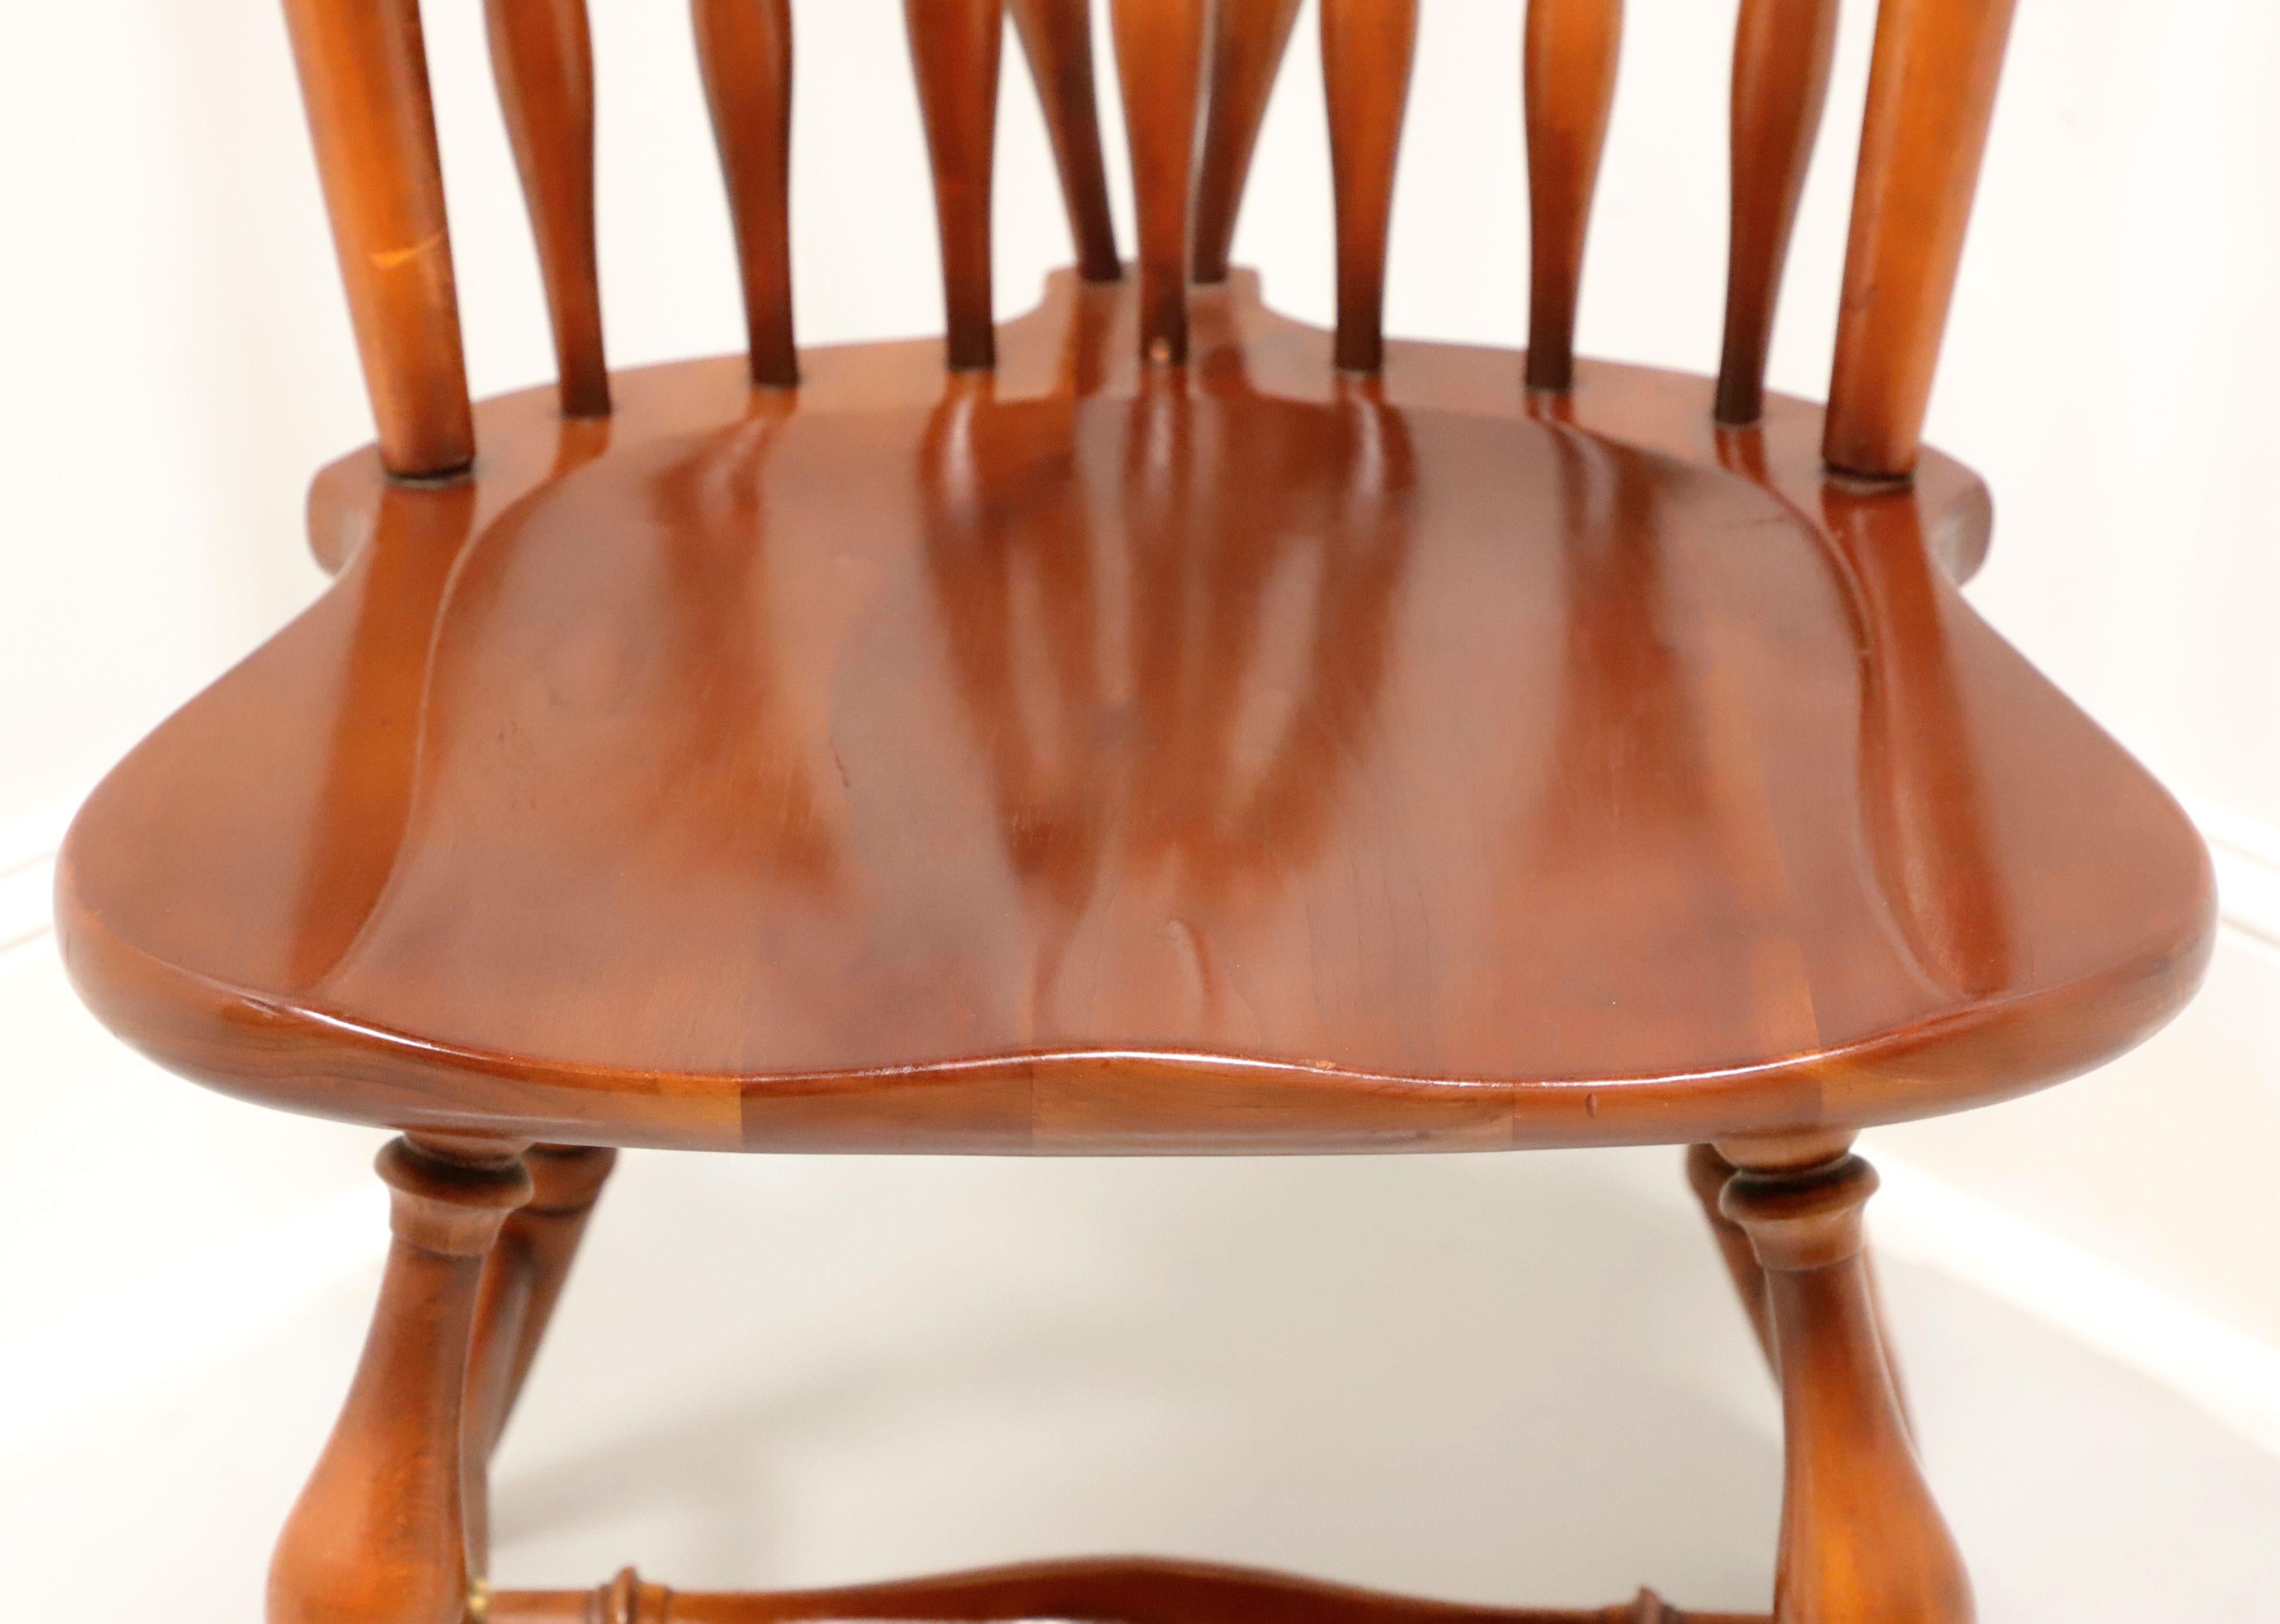 Other ETHAN ALLEN Duxbury Maple Windsor Dining Side Chair - A